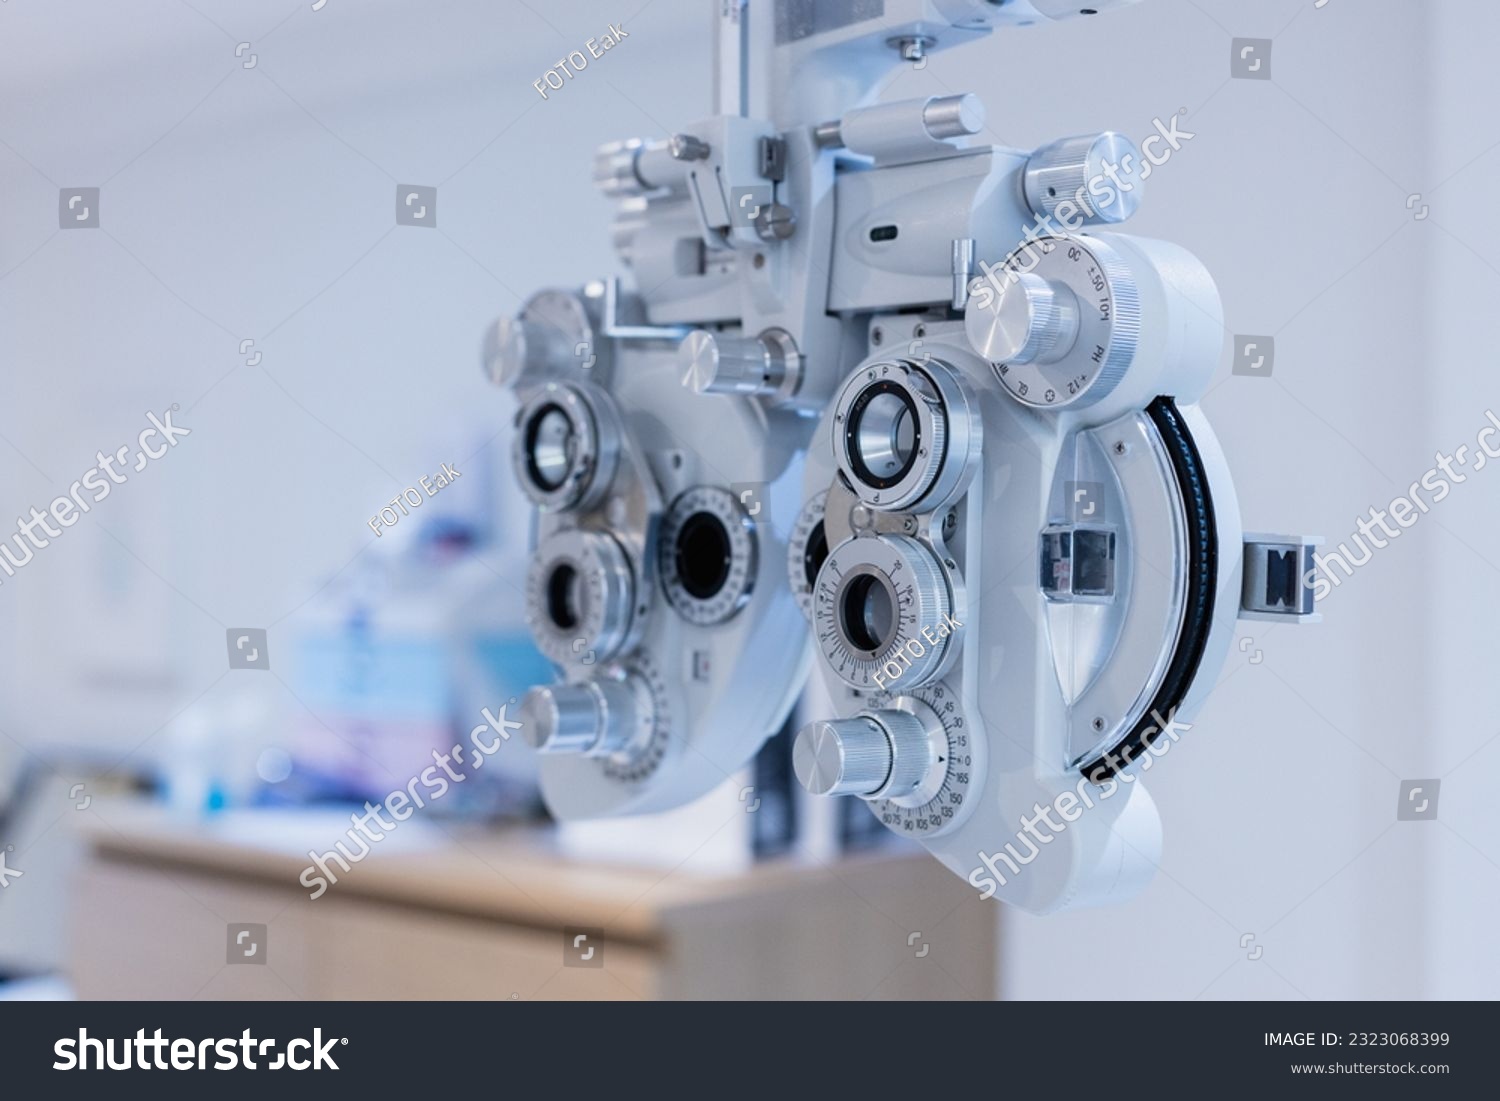 Phoropter eyesight measurement testing machine, Eye health check and ophthalmology concept. Web banner size. Copy space. #2323068399